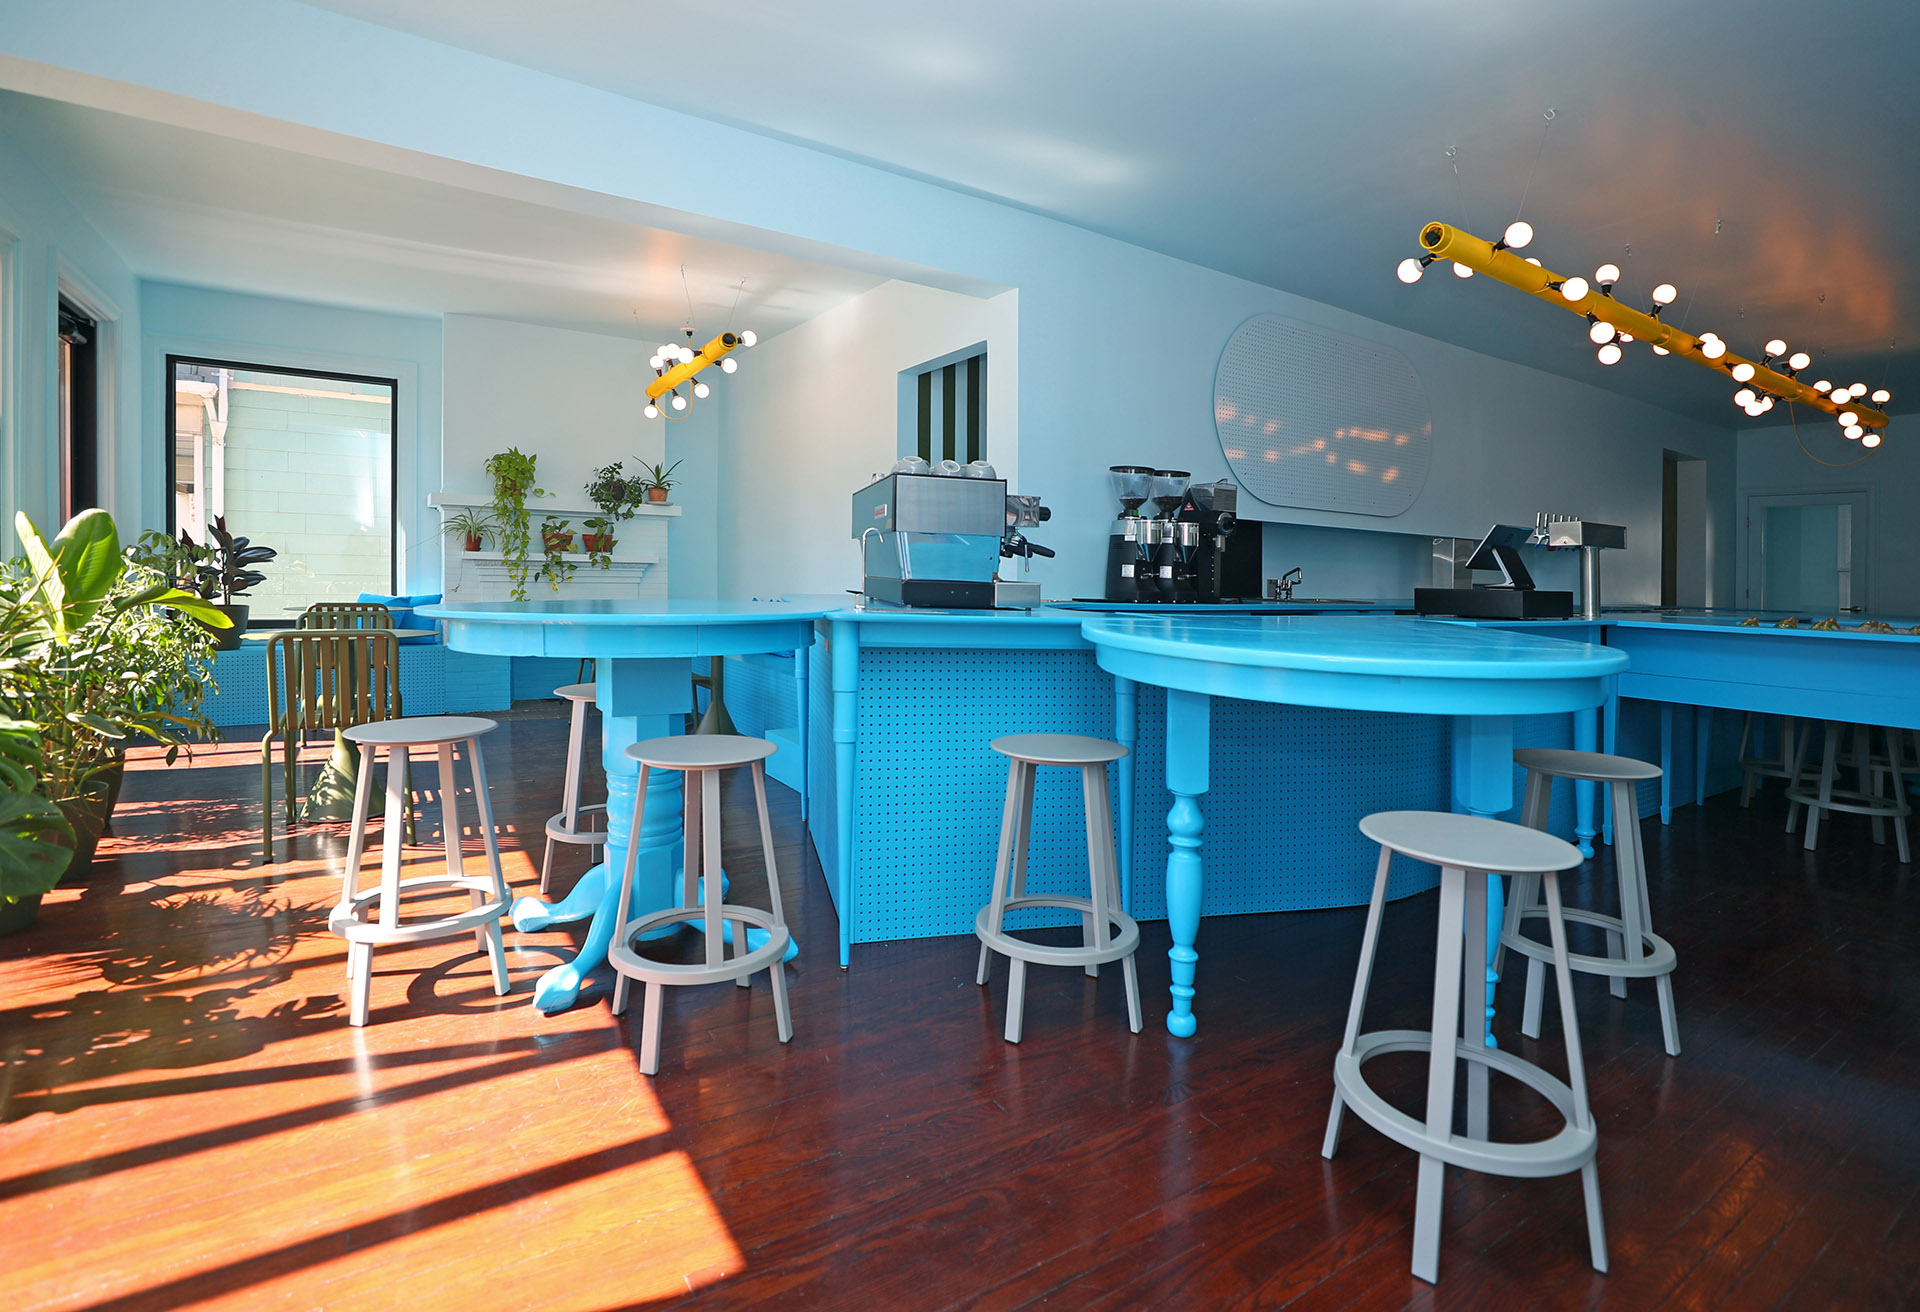 Tipico Café in New York. Refurbished tables form a blue counter that maximises social interaction